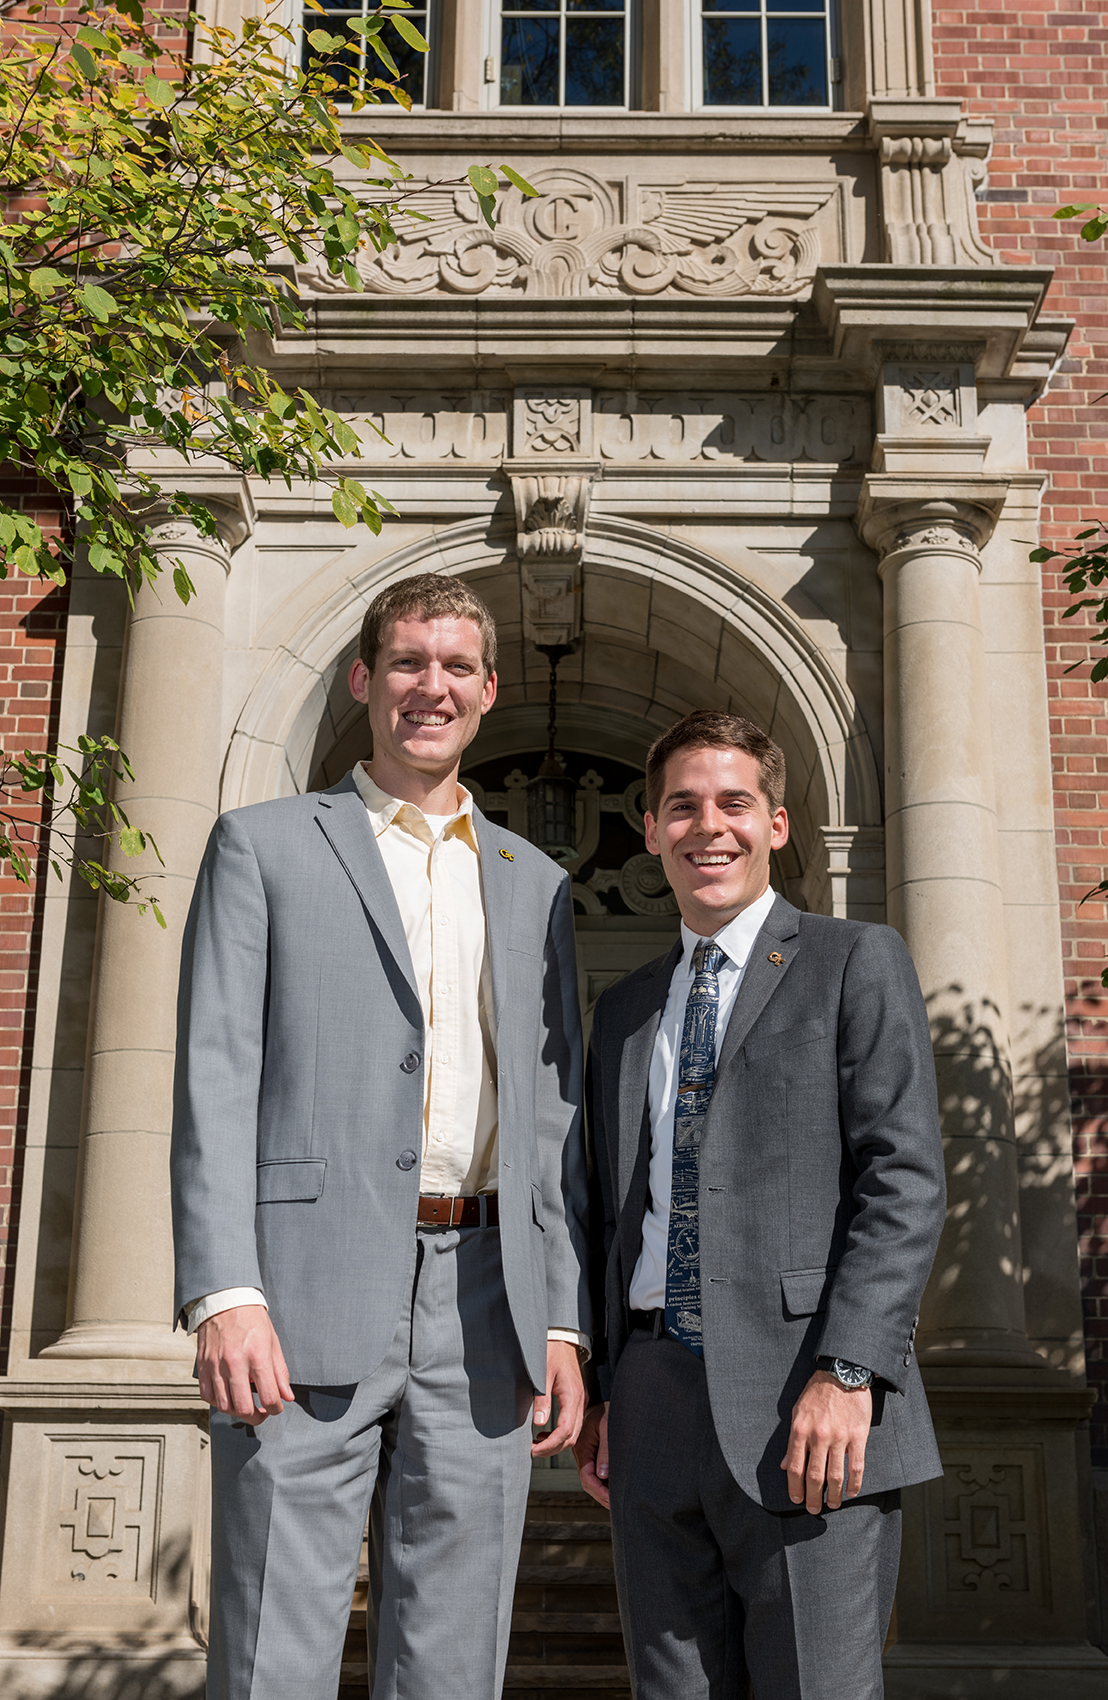 Matthew Miller and Marc Canellas are vice president and president of the Graduate Student Government Association for 2015-16. Both are pursuing a Ph.D. in aerospace engineering.